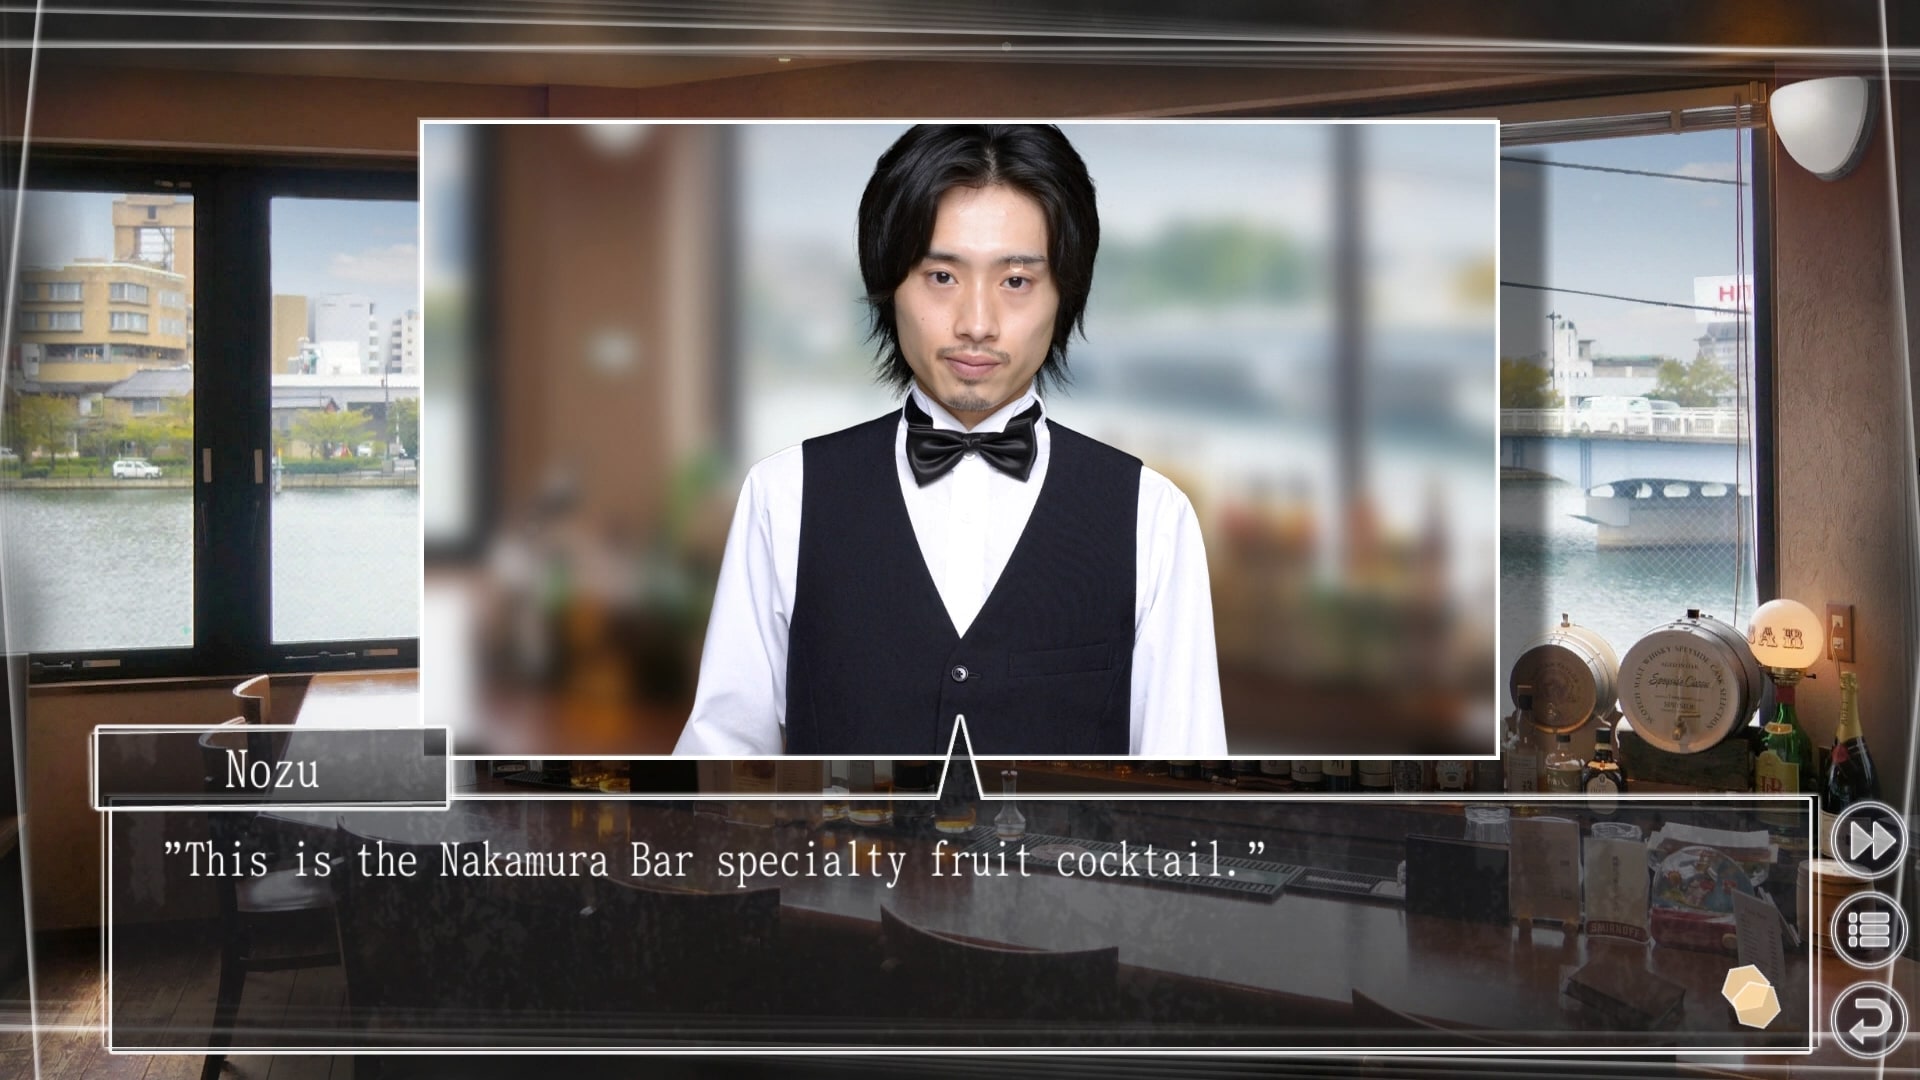 Root Letter Last Answer Additional Scenarios for Root Letter Last Answer Walkthrough - Scenario 3: The Nakamura Bar Special Cocktail - 9FF9B61